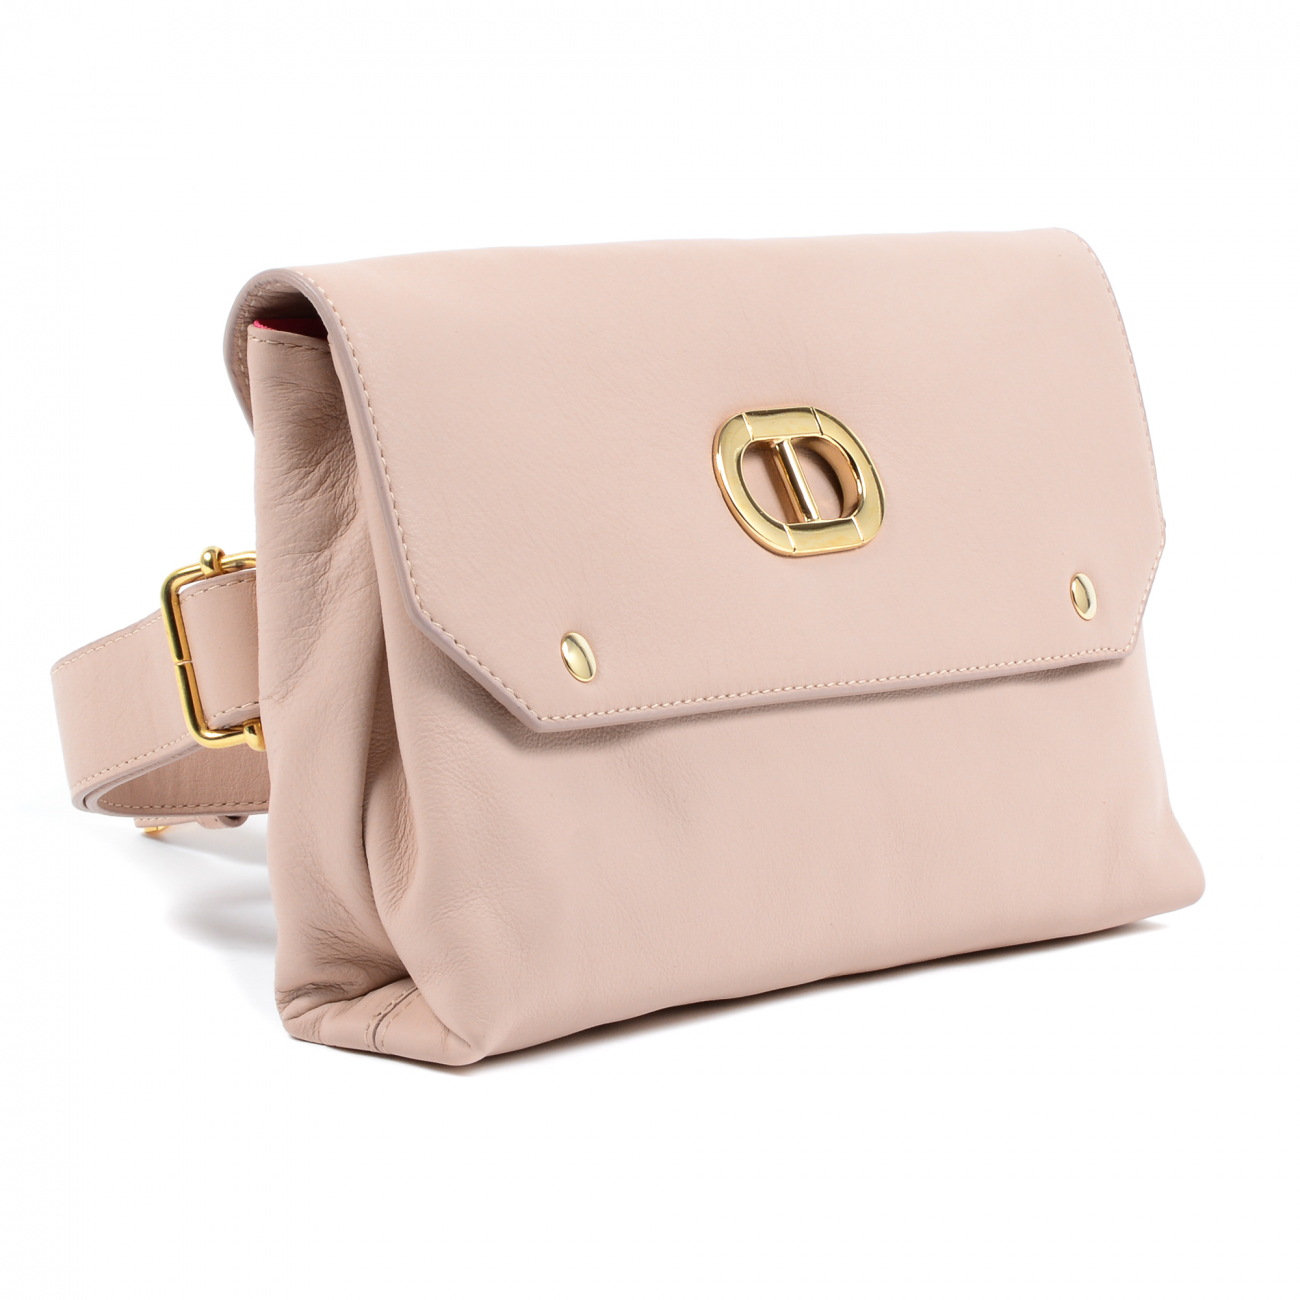 Details: GM2023 MIAMI SILVER PINK - Color: Pink - Composition: 100% LEATHER - Measures (Width-Height-Depth): 26x16x6 cm - Made: ITALY - Front Logo - Botton Closure - Logo Inside - Two Inside Pocket - One Inside Zip Pocket